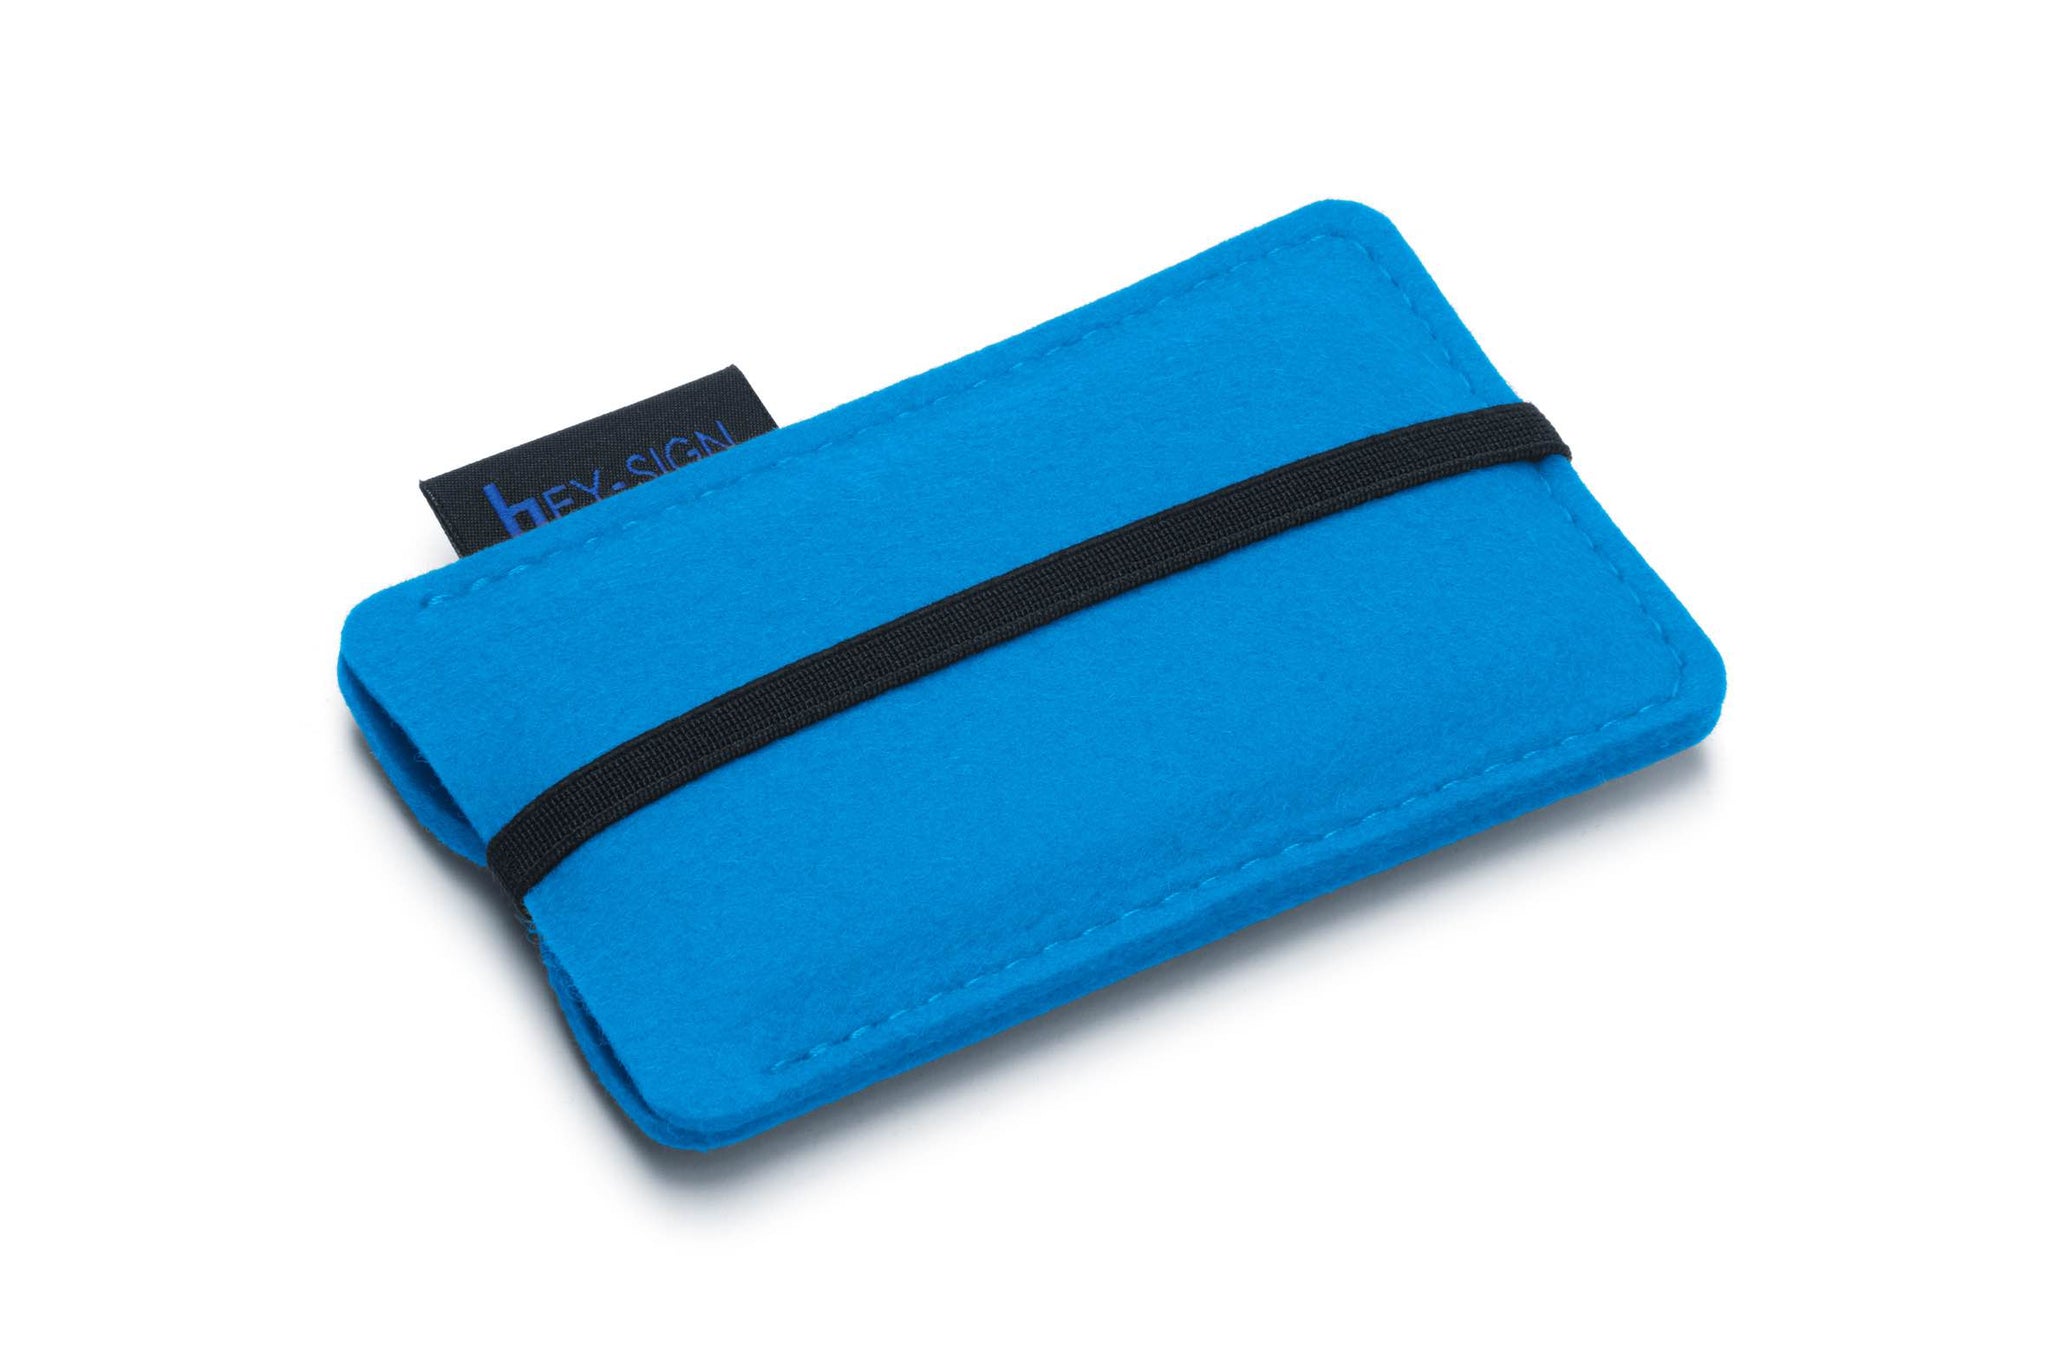 Felt Smartphone Sleeve or Pouch in Petrol-Blue by Hey-Sign 301031434